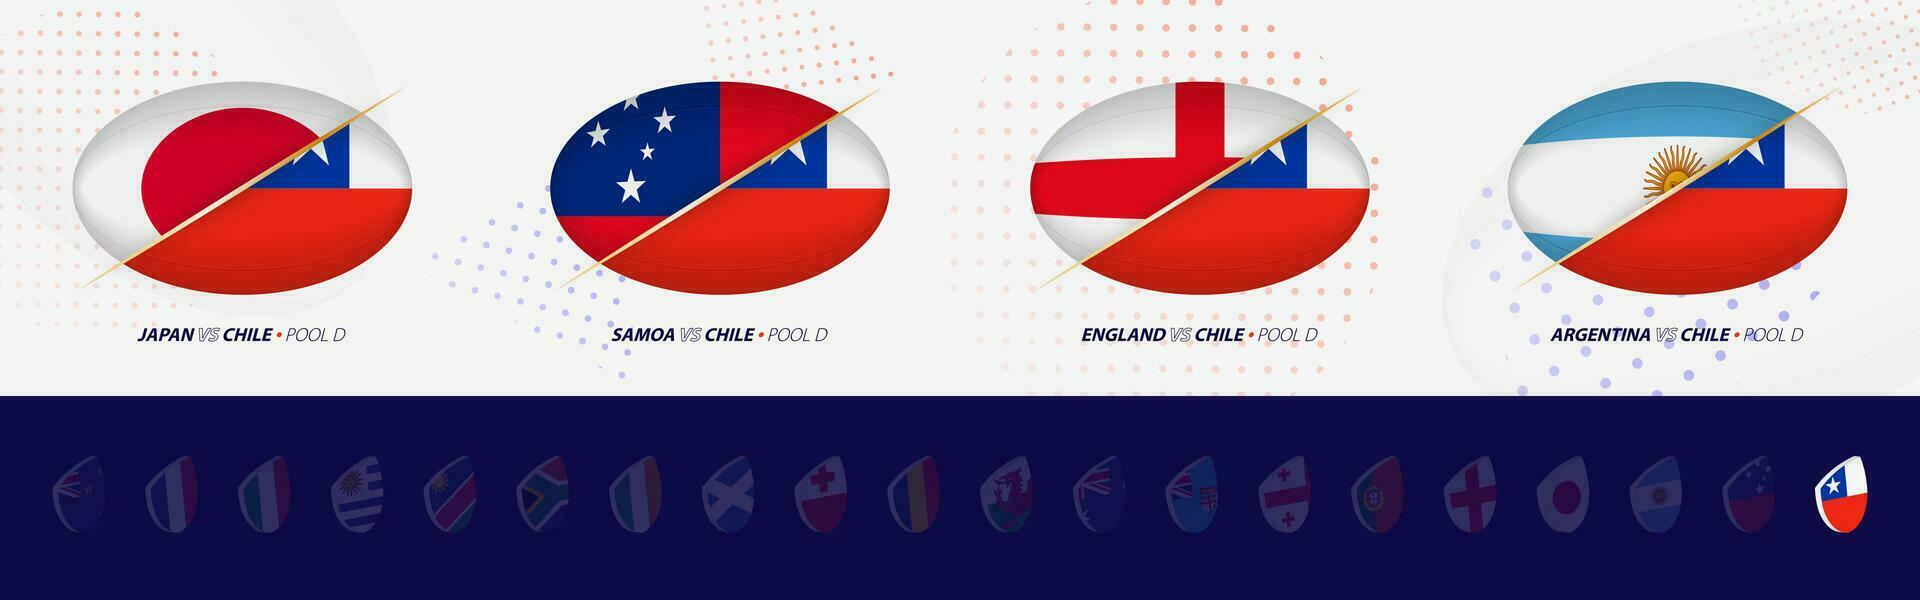 Rugby competition icons of Chile rugby national team, all four matches icon in pool. vector